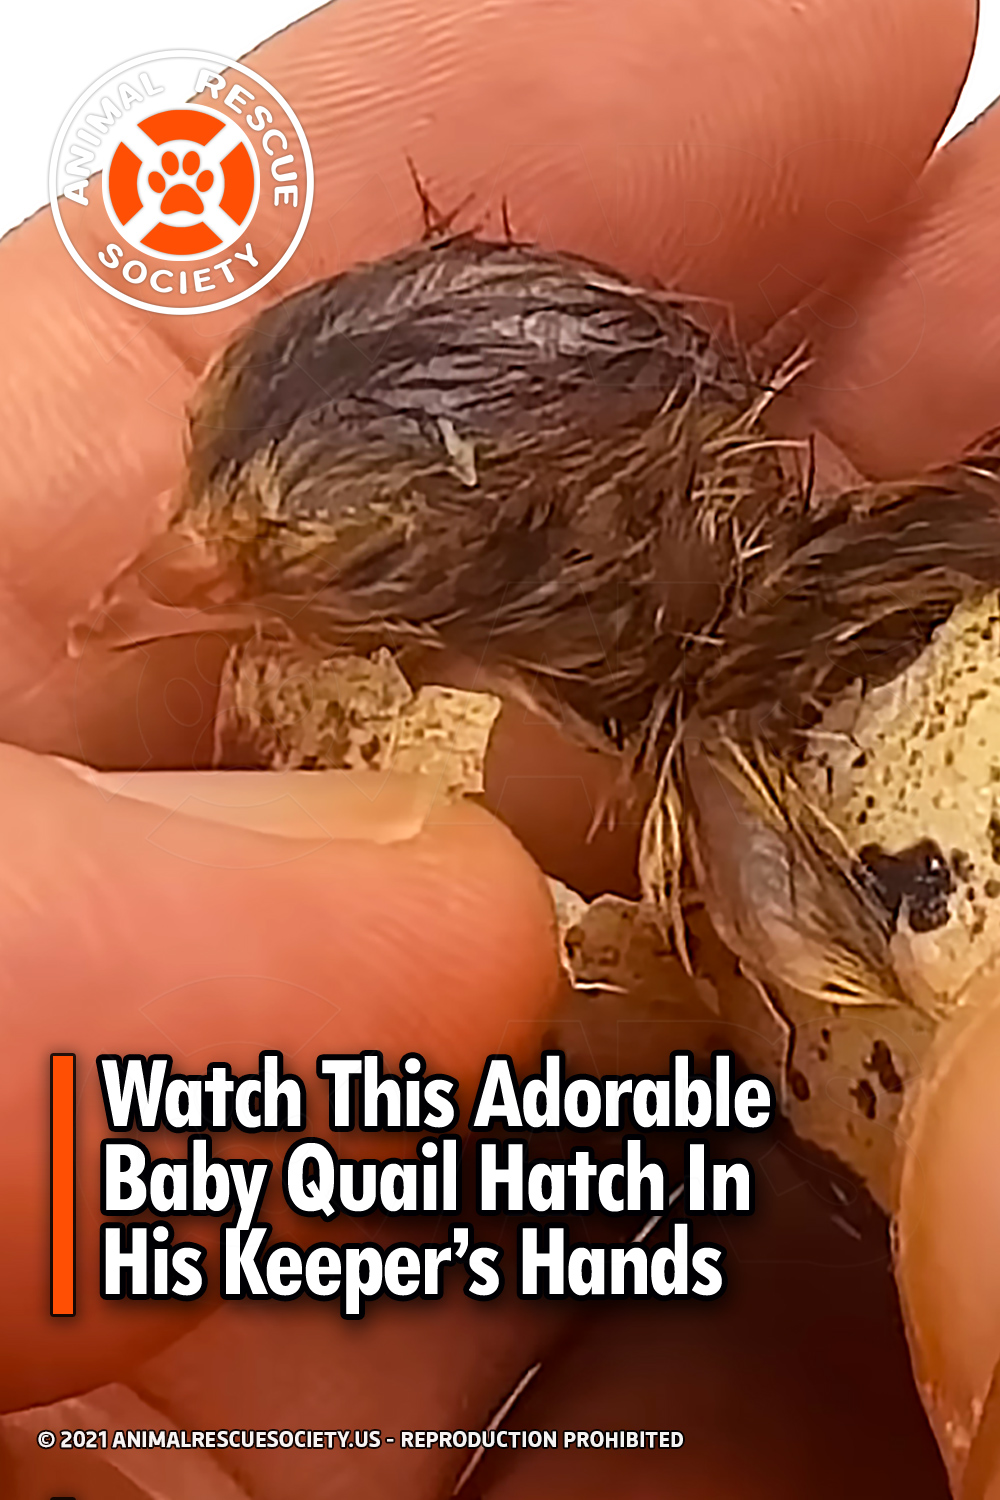 Watch This Adorable Baby Quail Hatch In His Keeper’s Hands